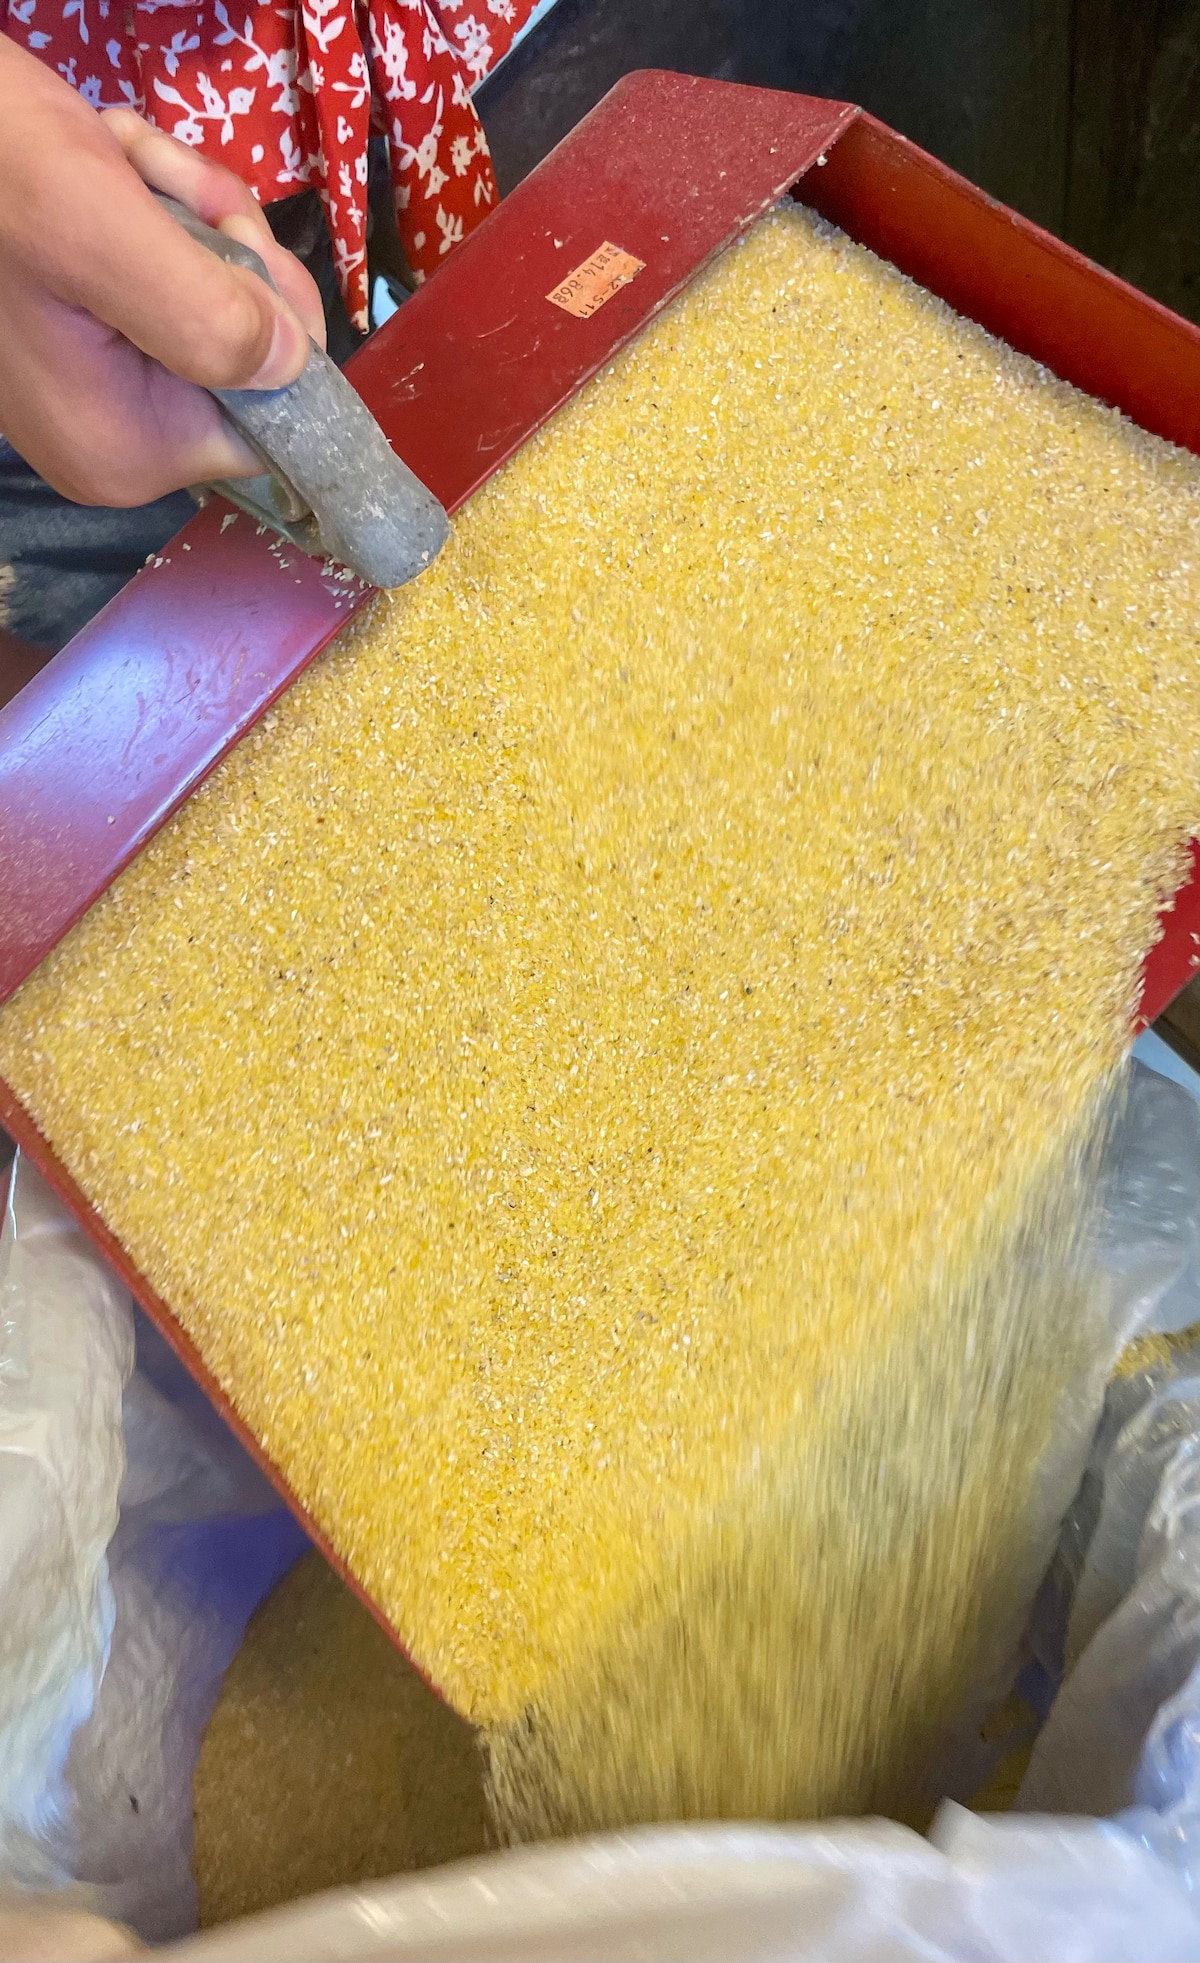 Large red rectangle scoop with yellow grits falling out.